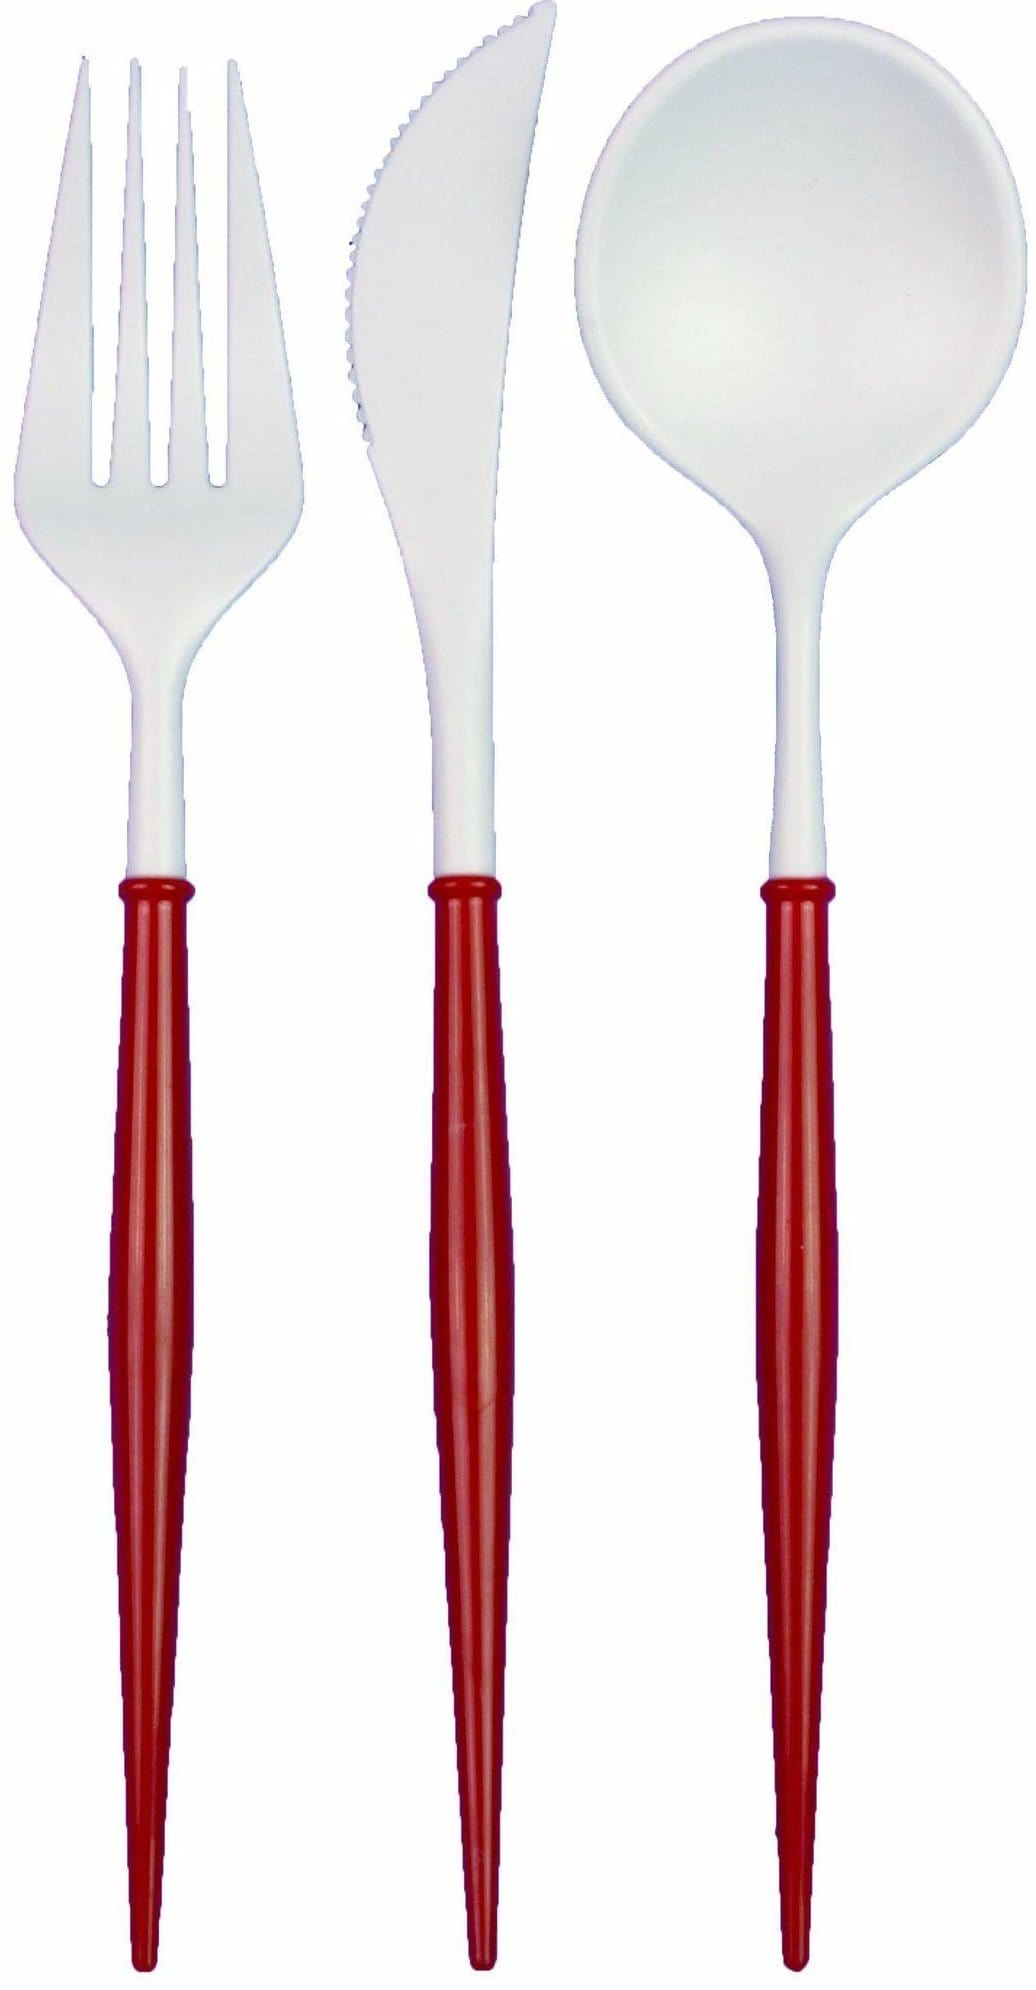 Cutlery White/ Red Handle Plastic/ 24PC